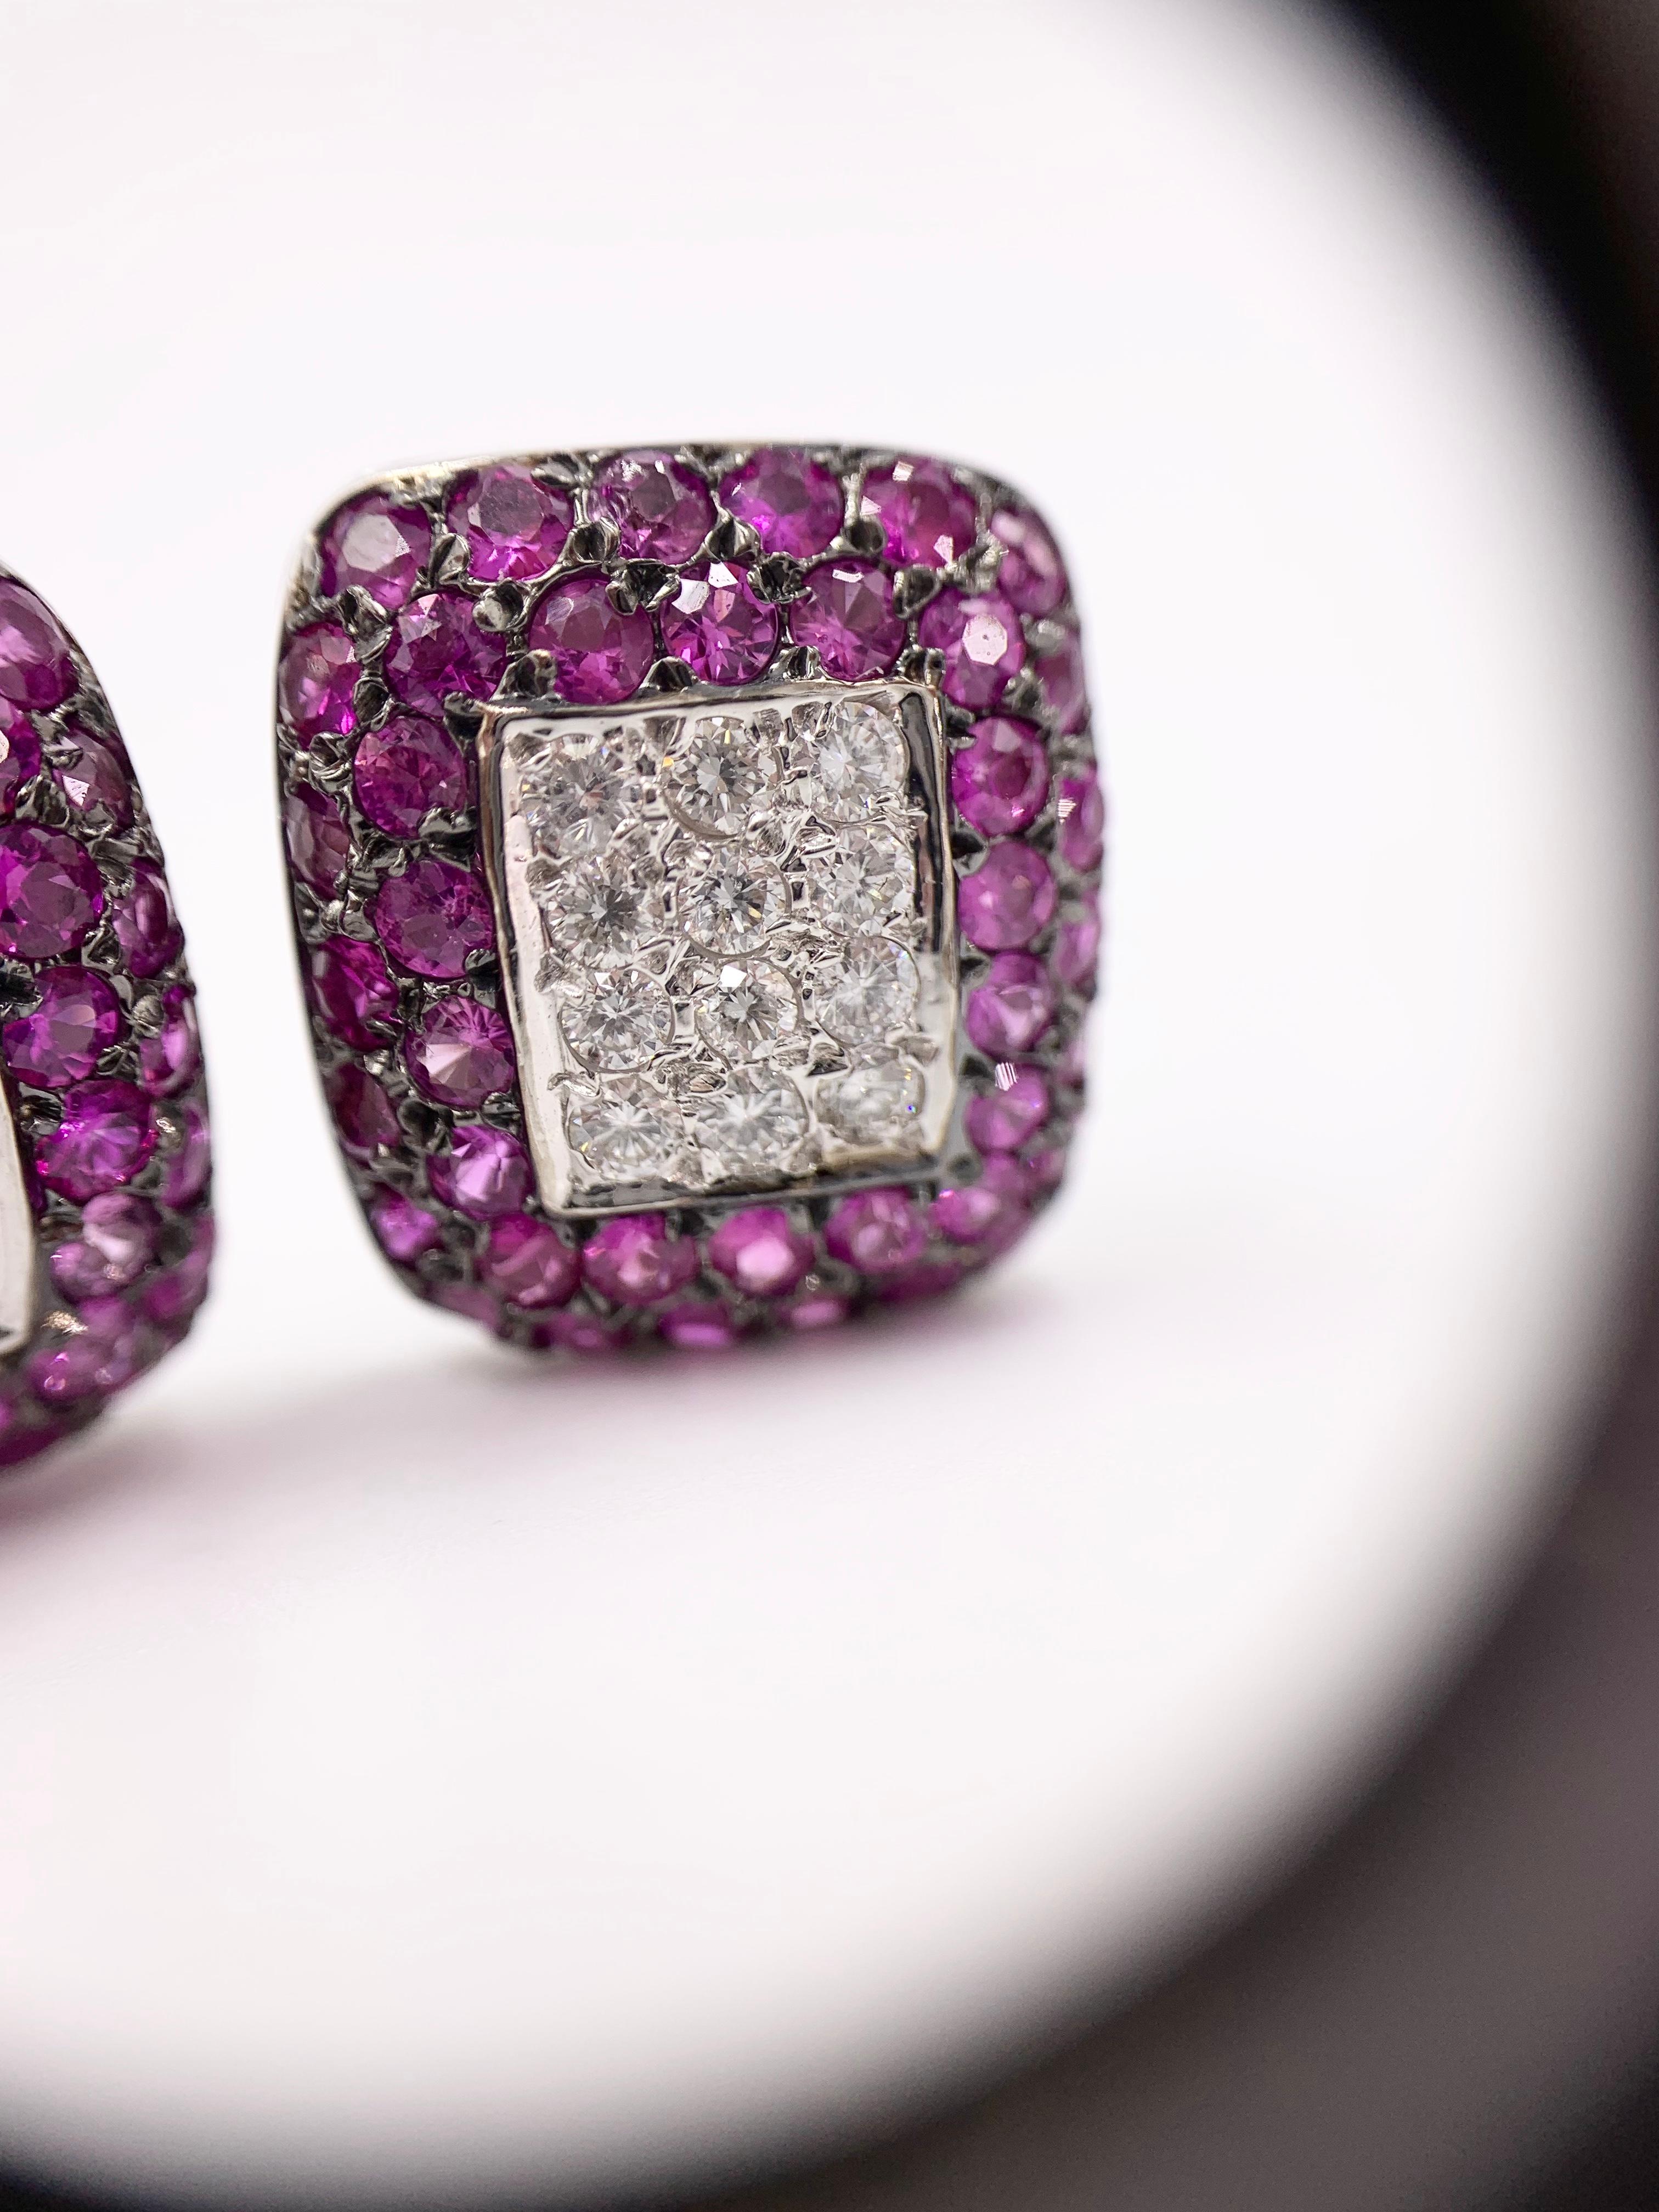 18 Karat White Gold Diamond and Pink Sapphire Earrings In Excellent Condition For Sale In Pikesville, MD